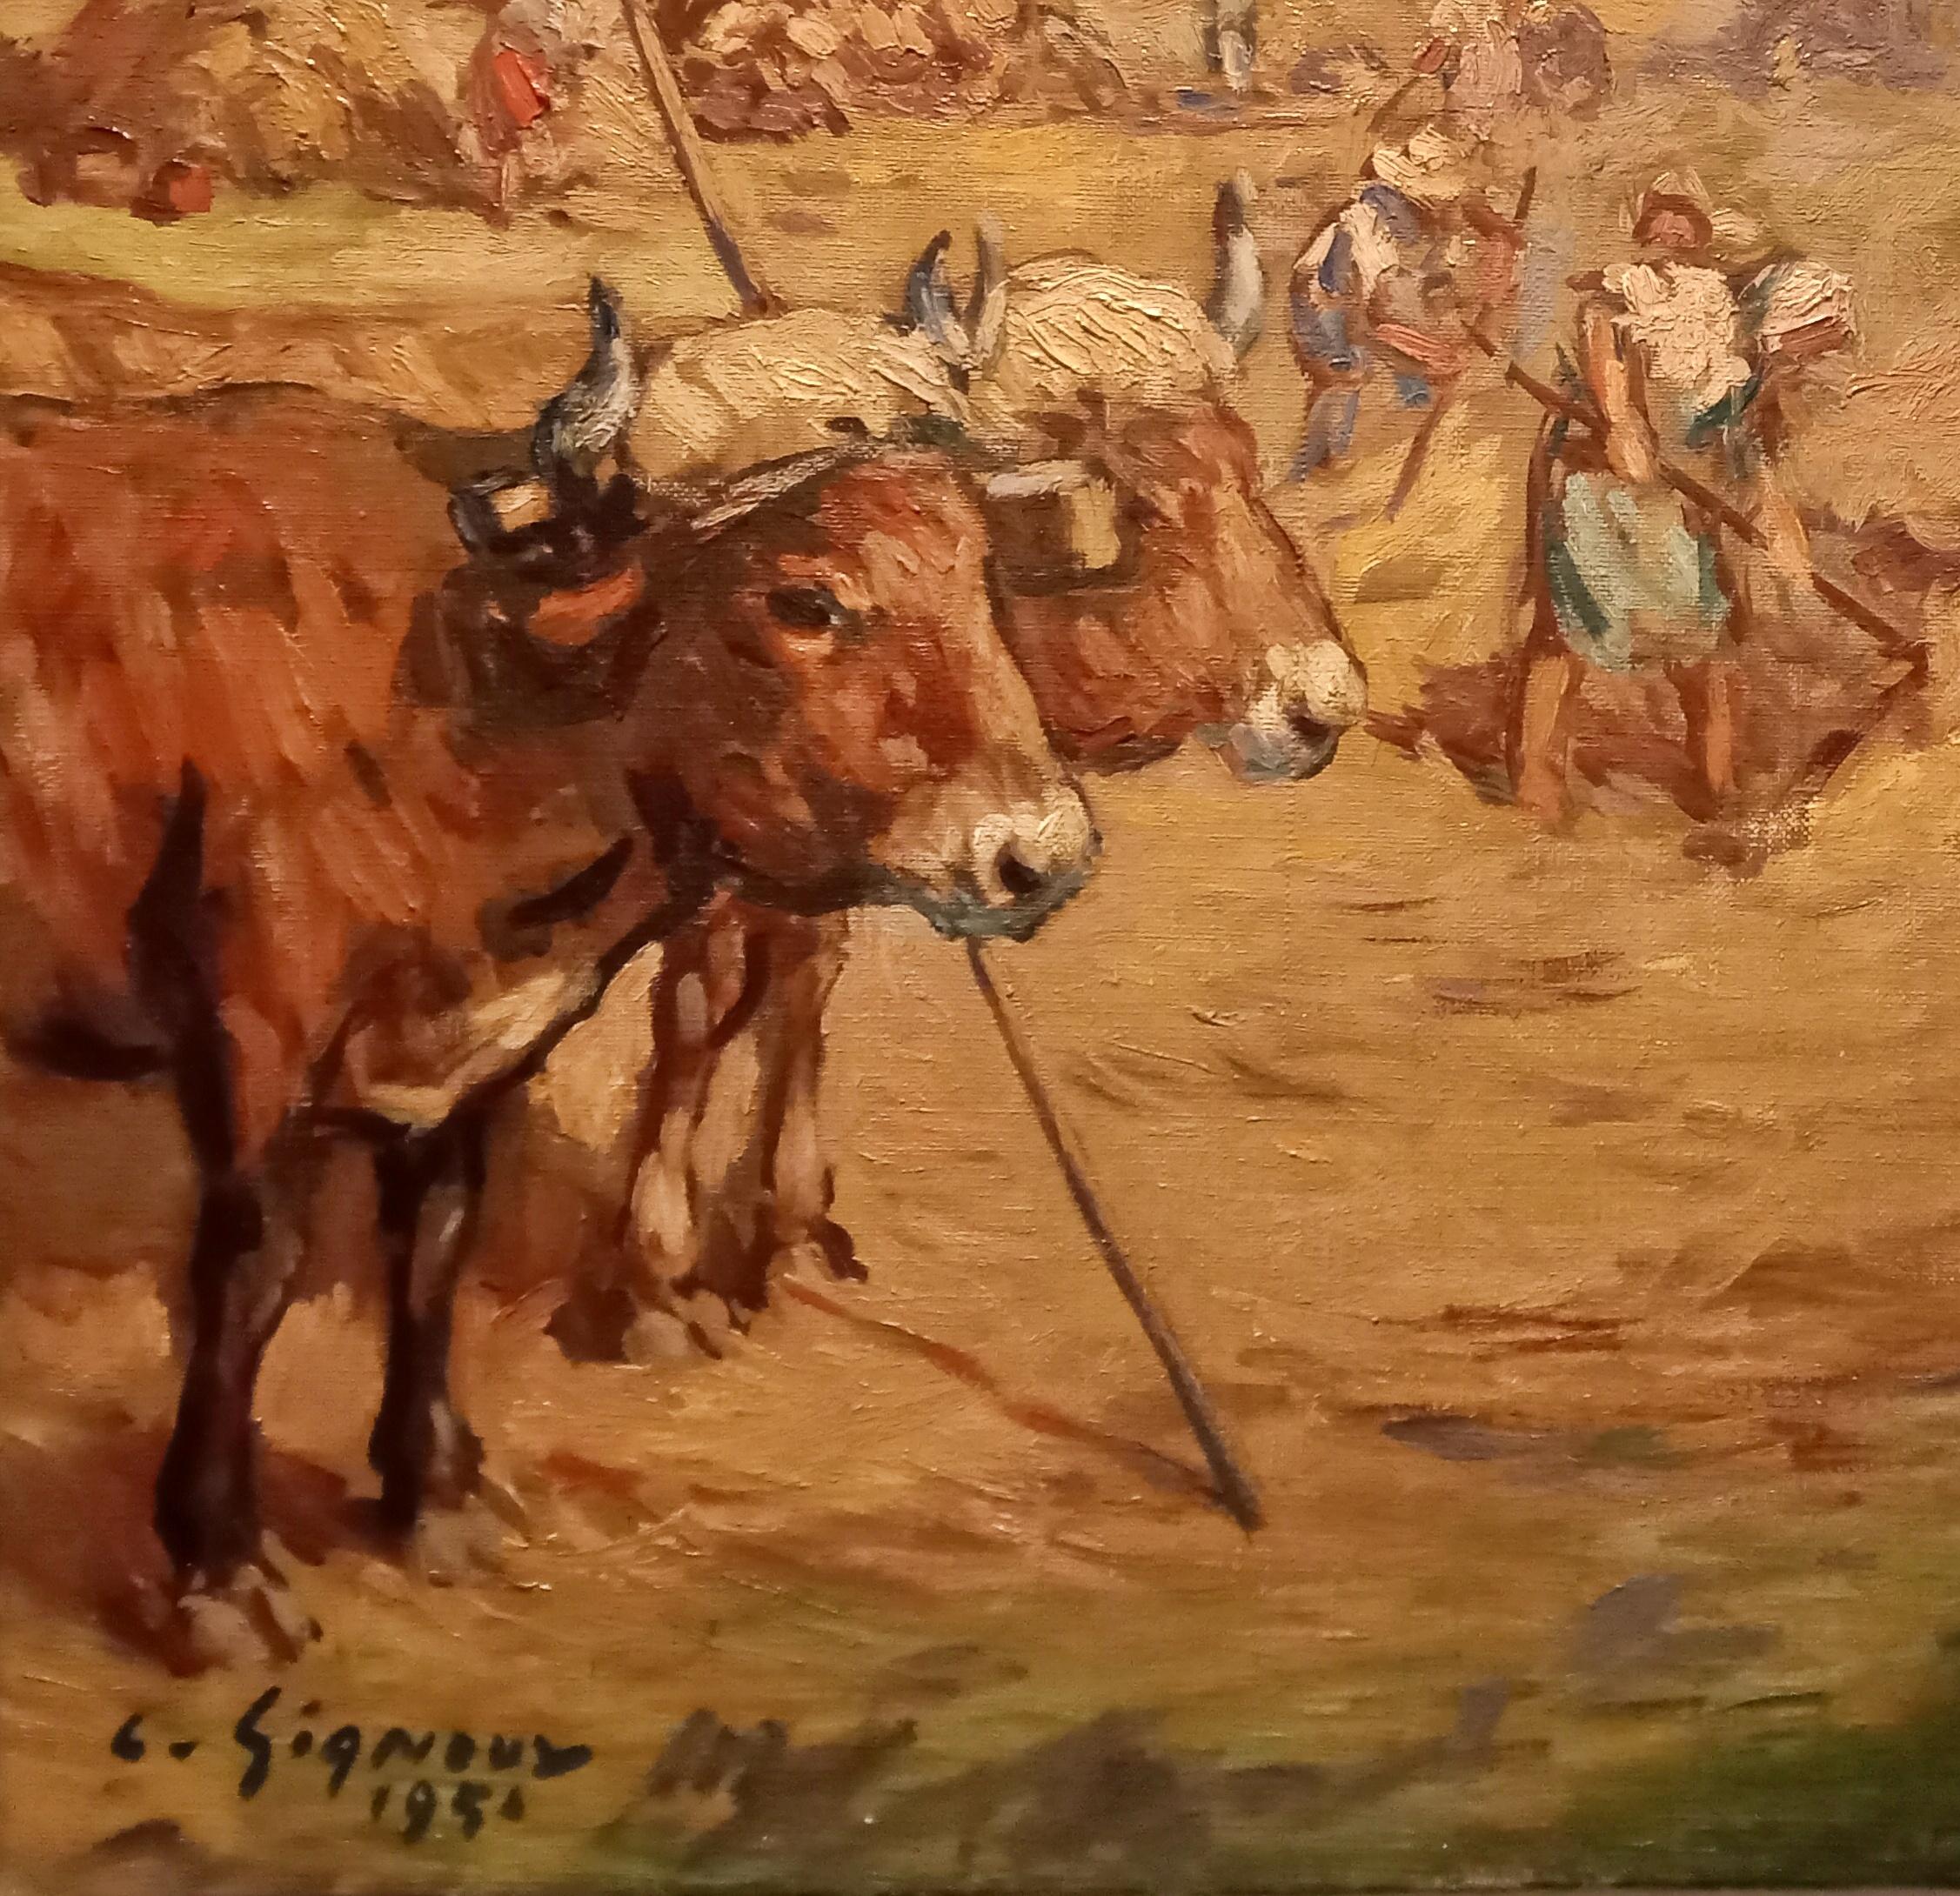 Ludovico Gignoux

Work in the field
oil painting on canvas
signed
very good condition
early 20th century
without frame.